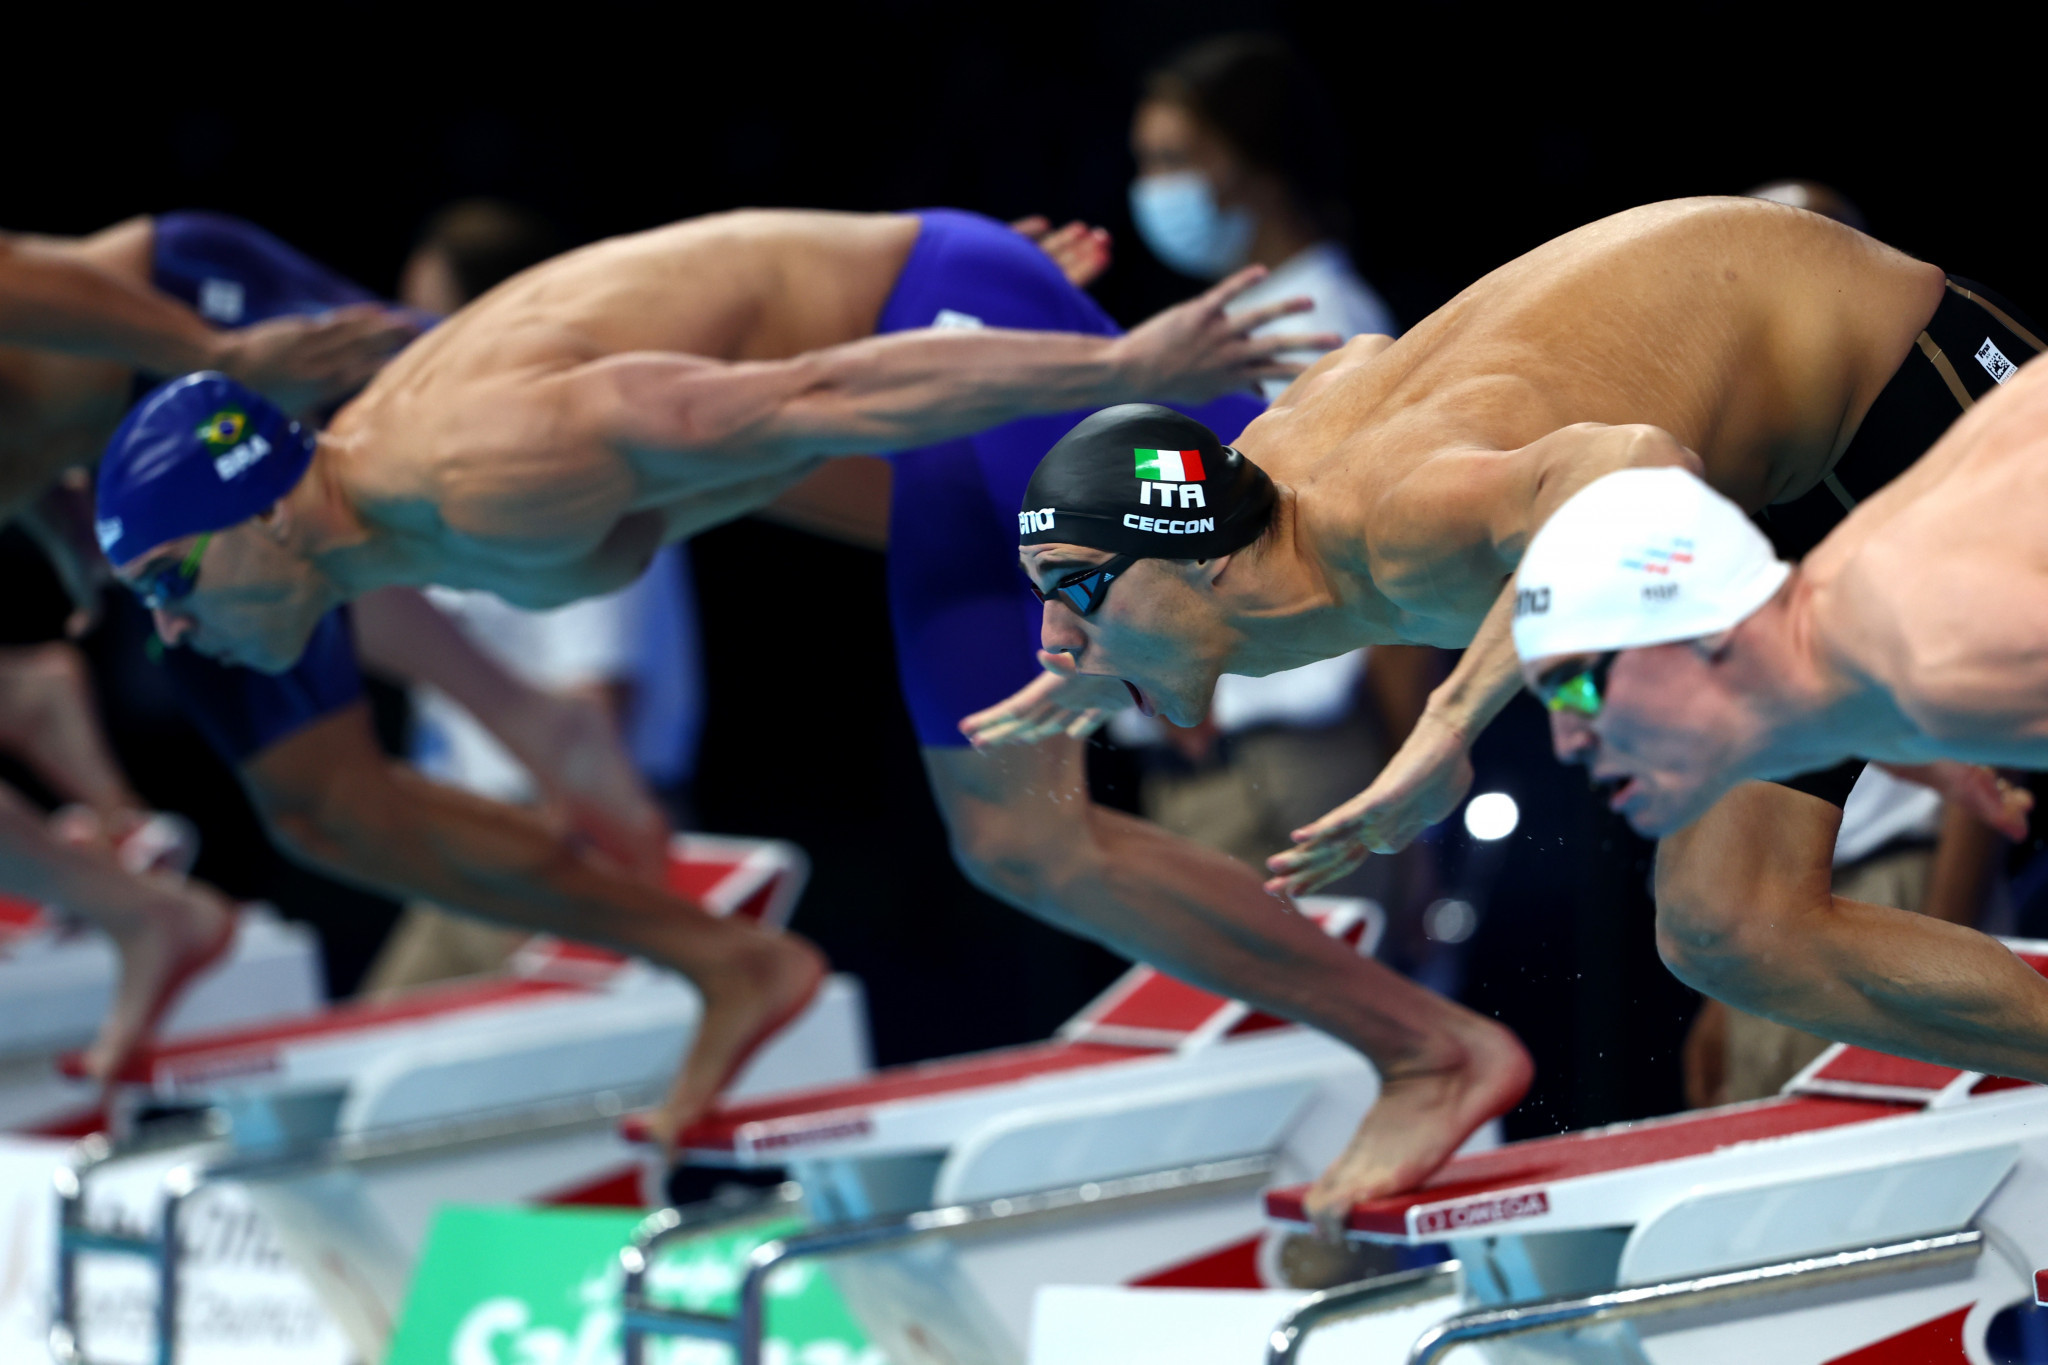 Italy's Thomas Ceccon, centre, looks to make a strong start as he propels himself off the diving board ©Getty Images